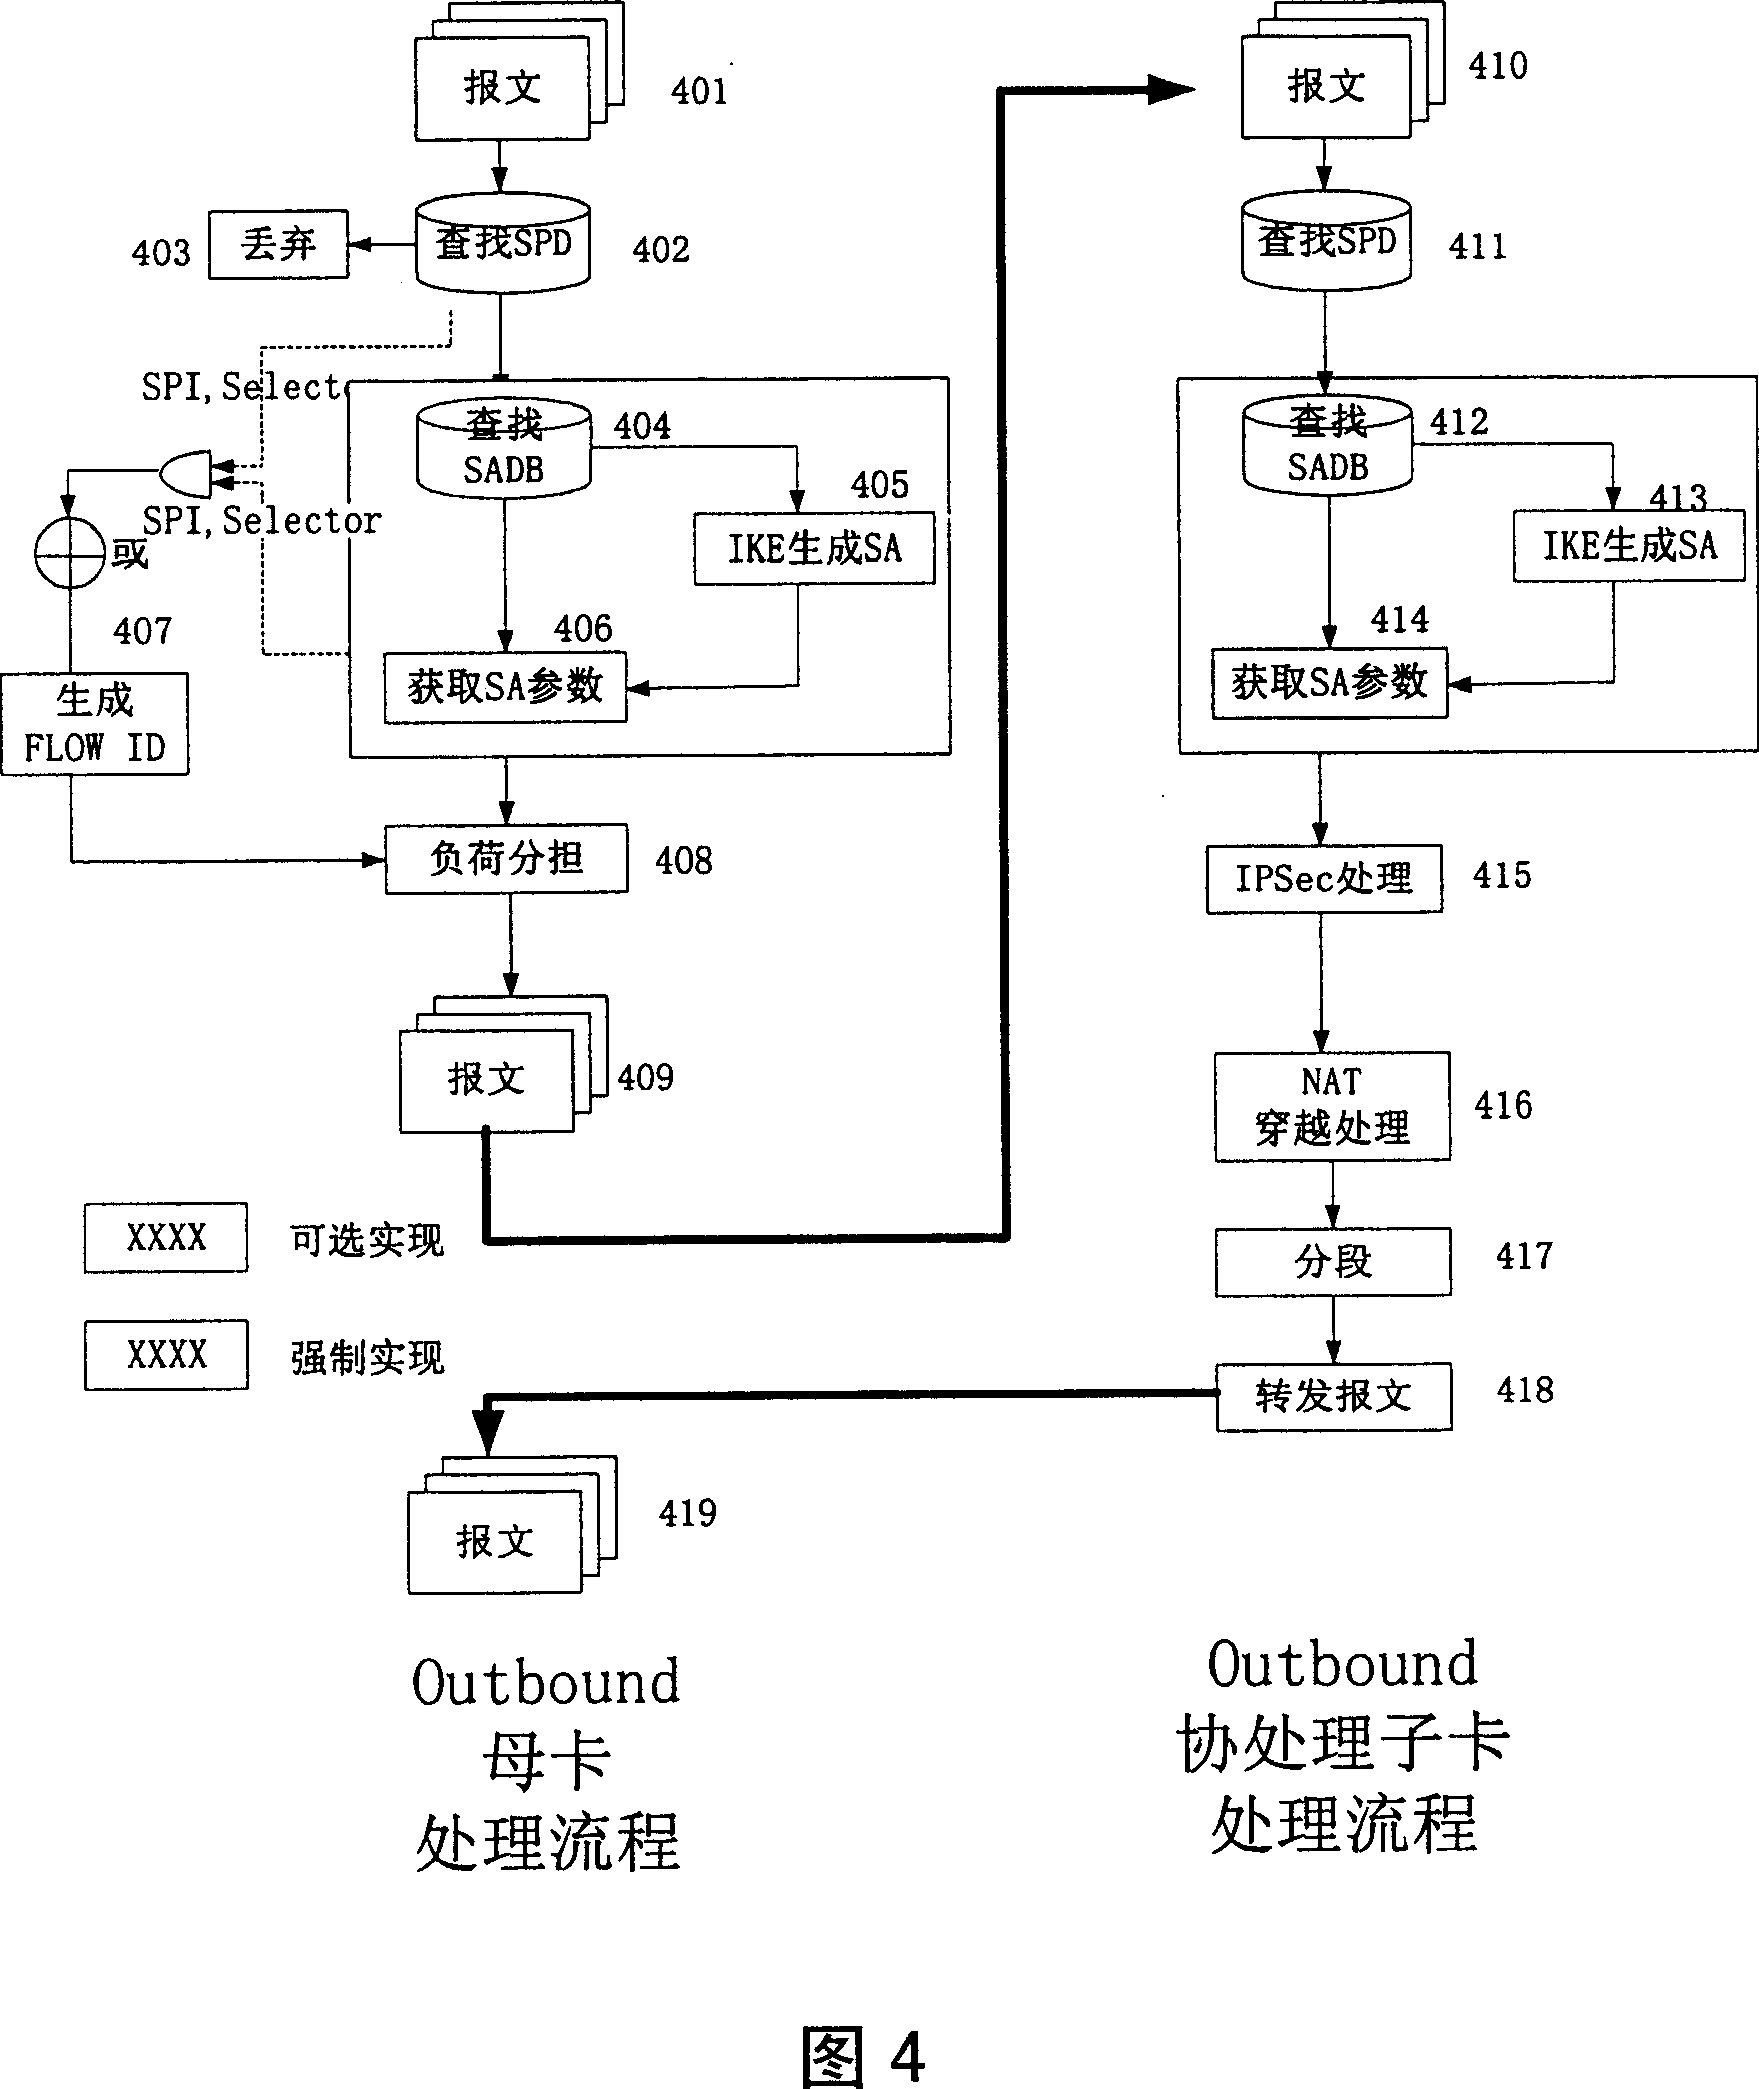 Method for processing distributed IPSec